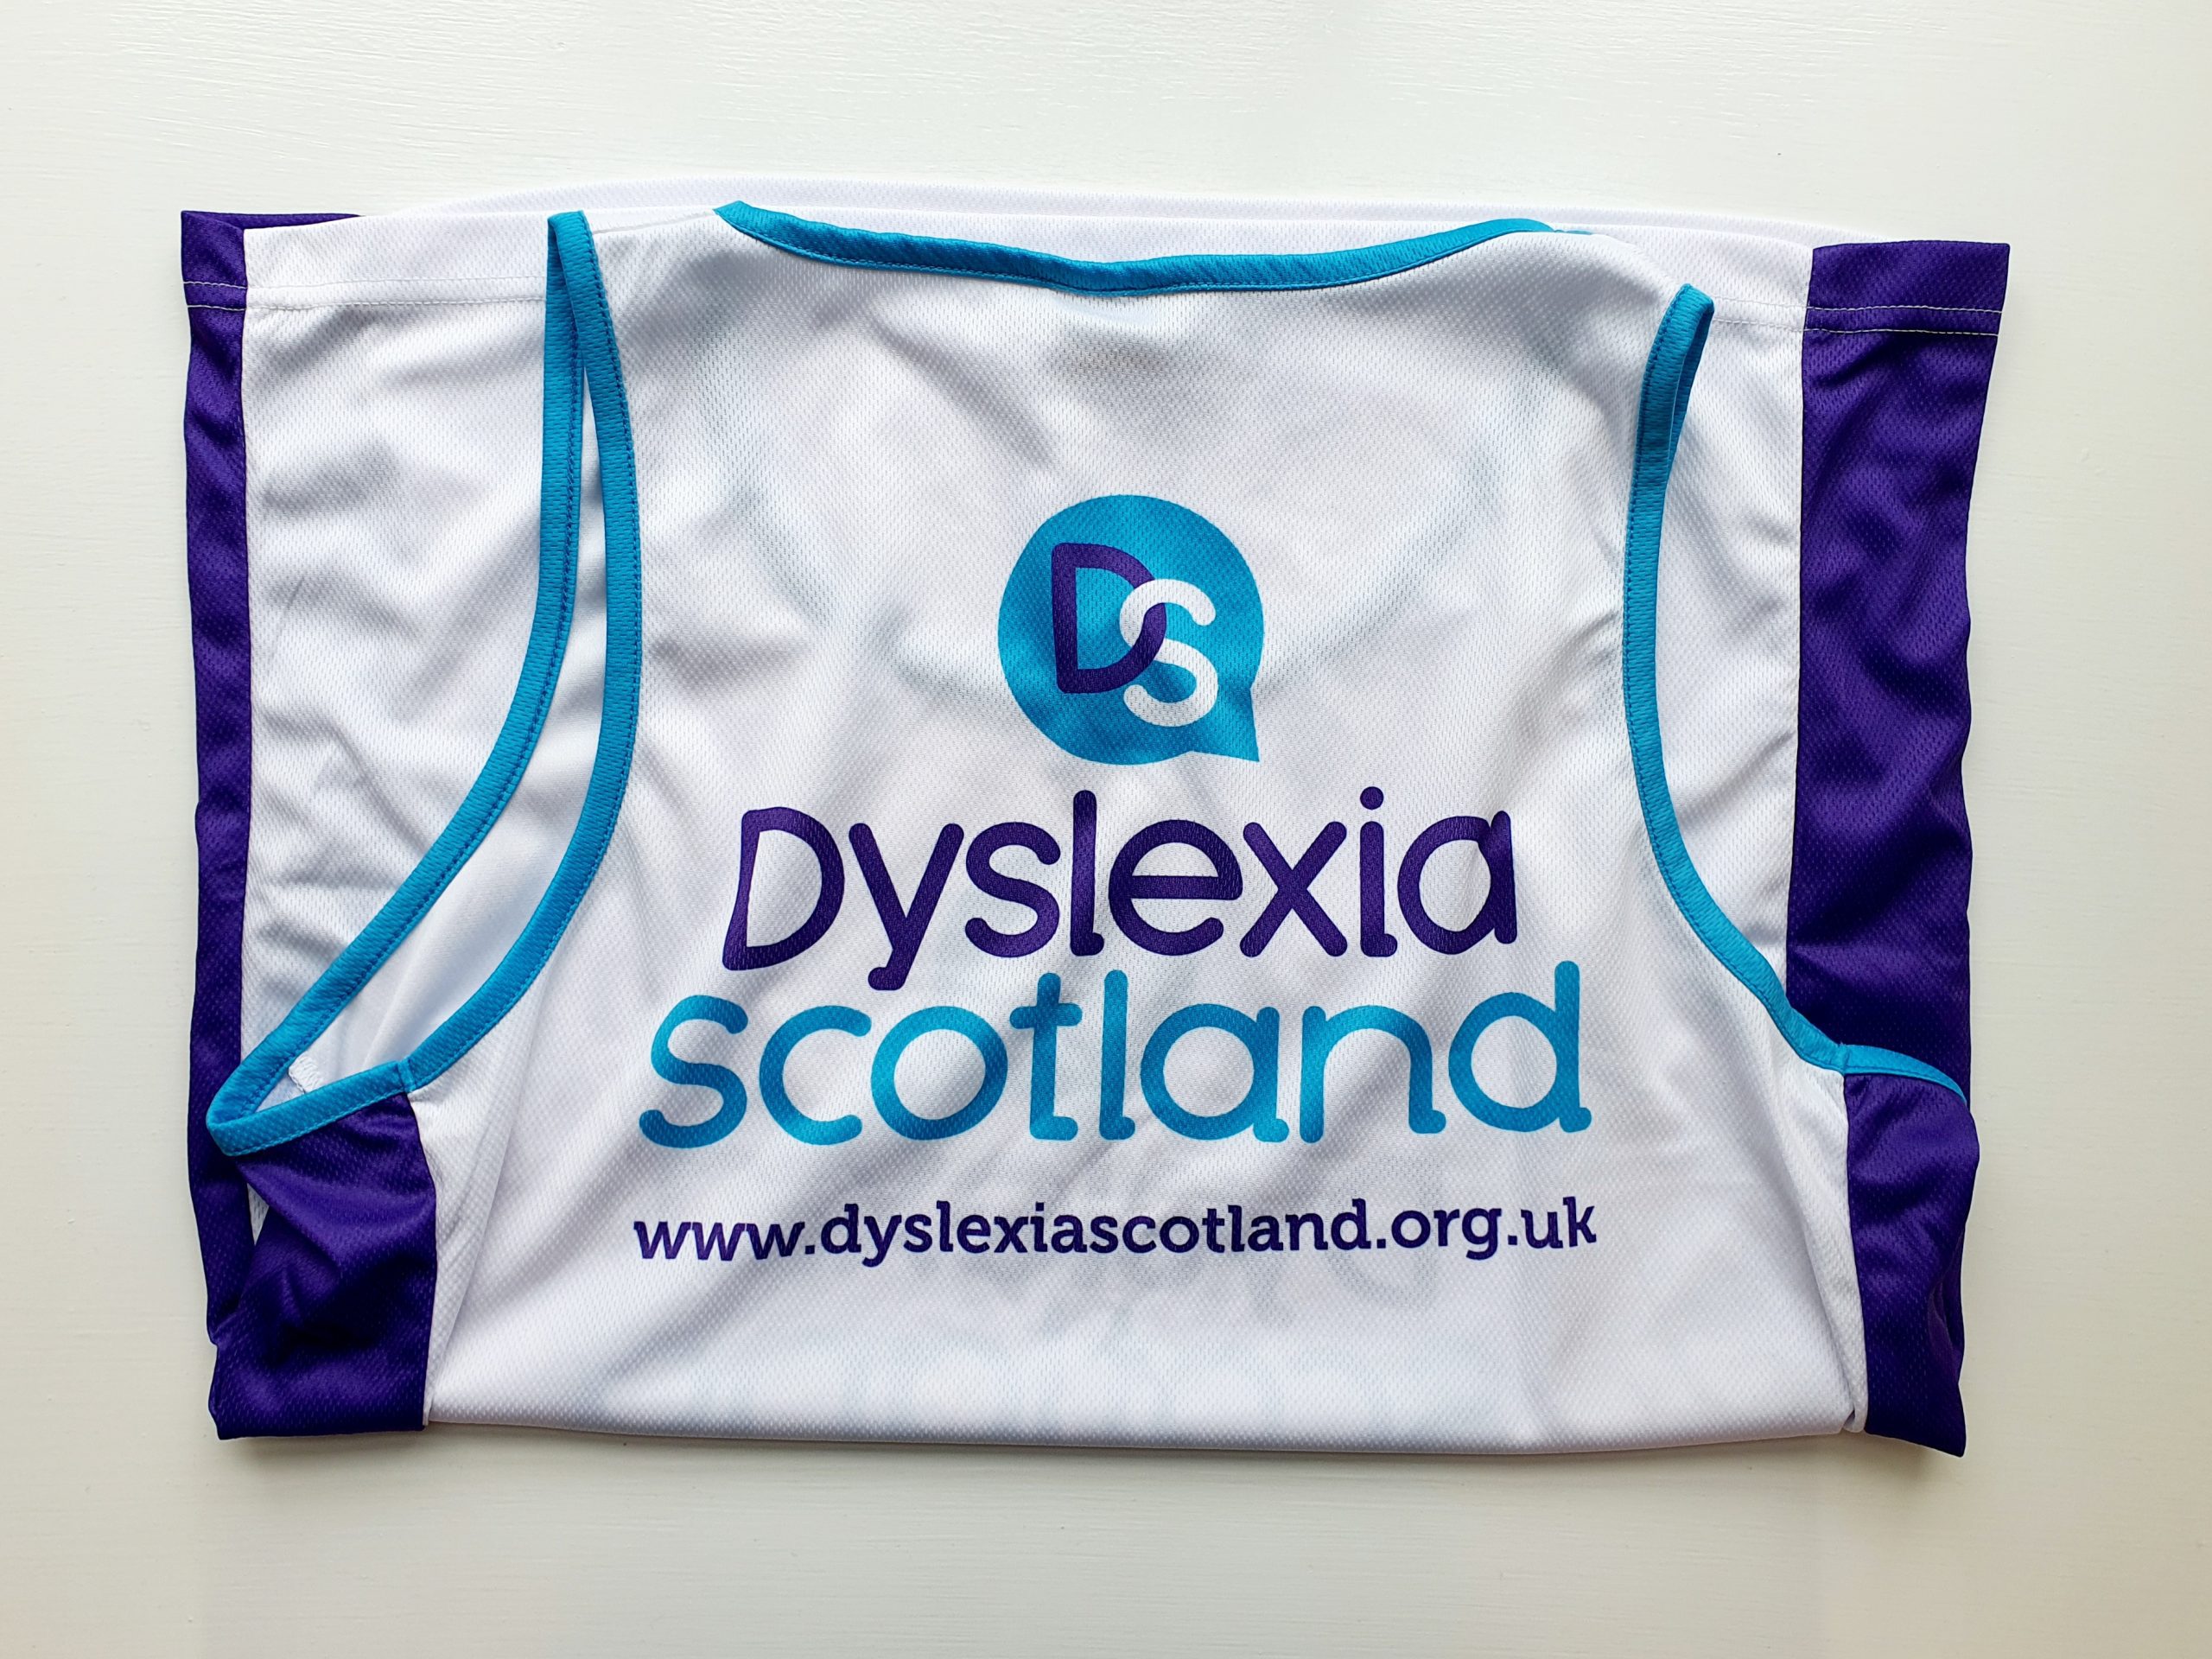 The vest folded so the back is showin g- the DYslexia Scotland logo is on the white back; the sides of the vest are purple panels.